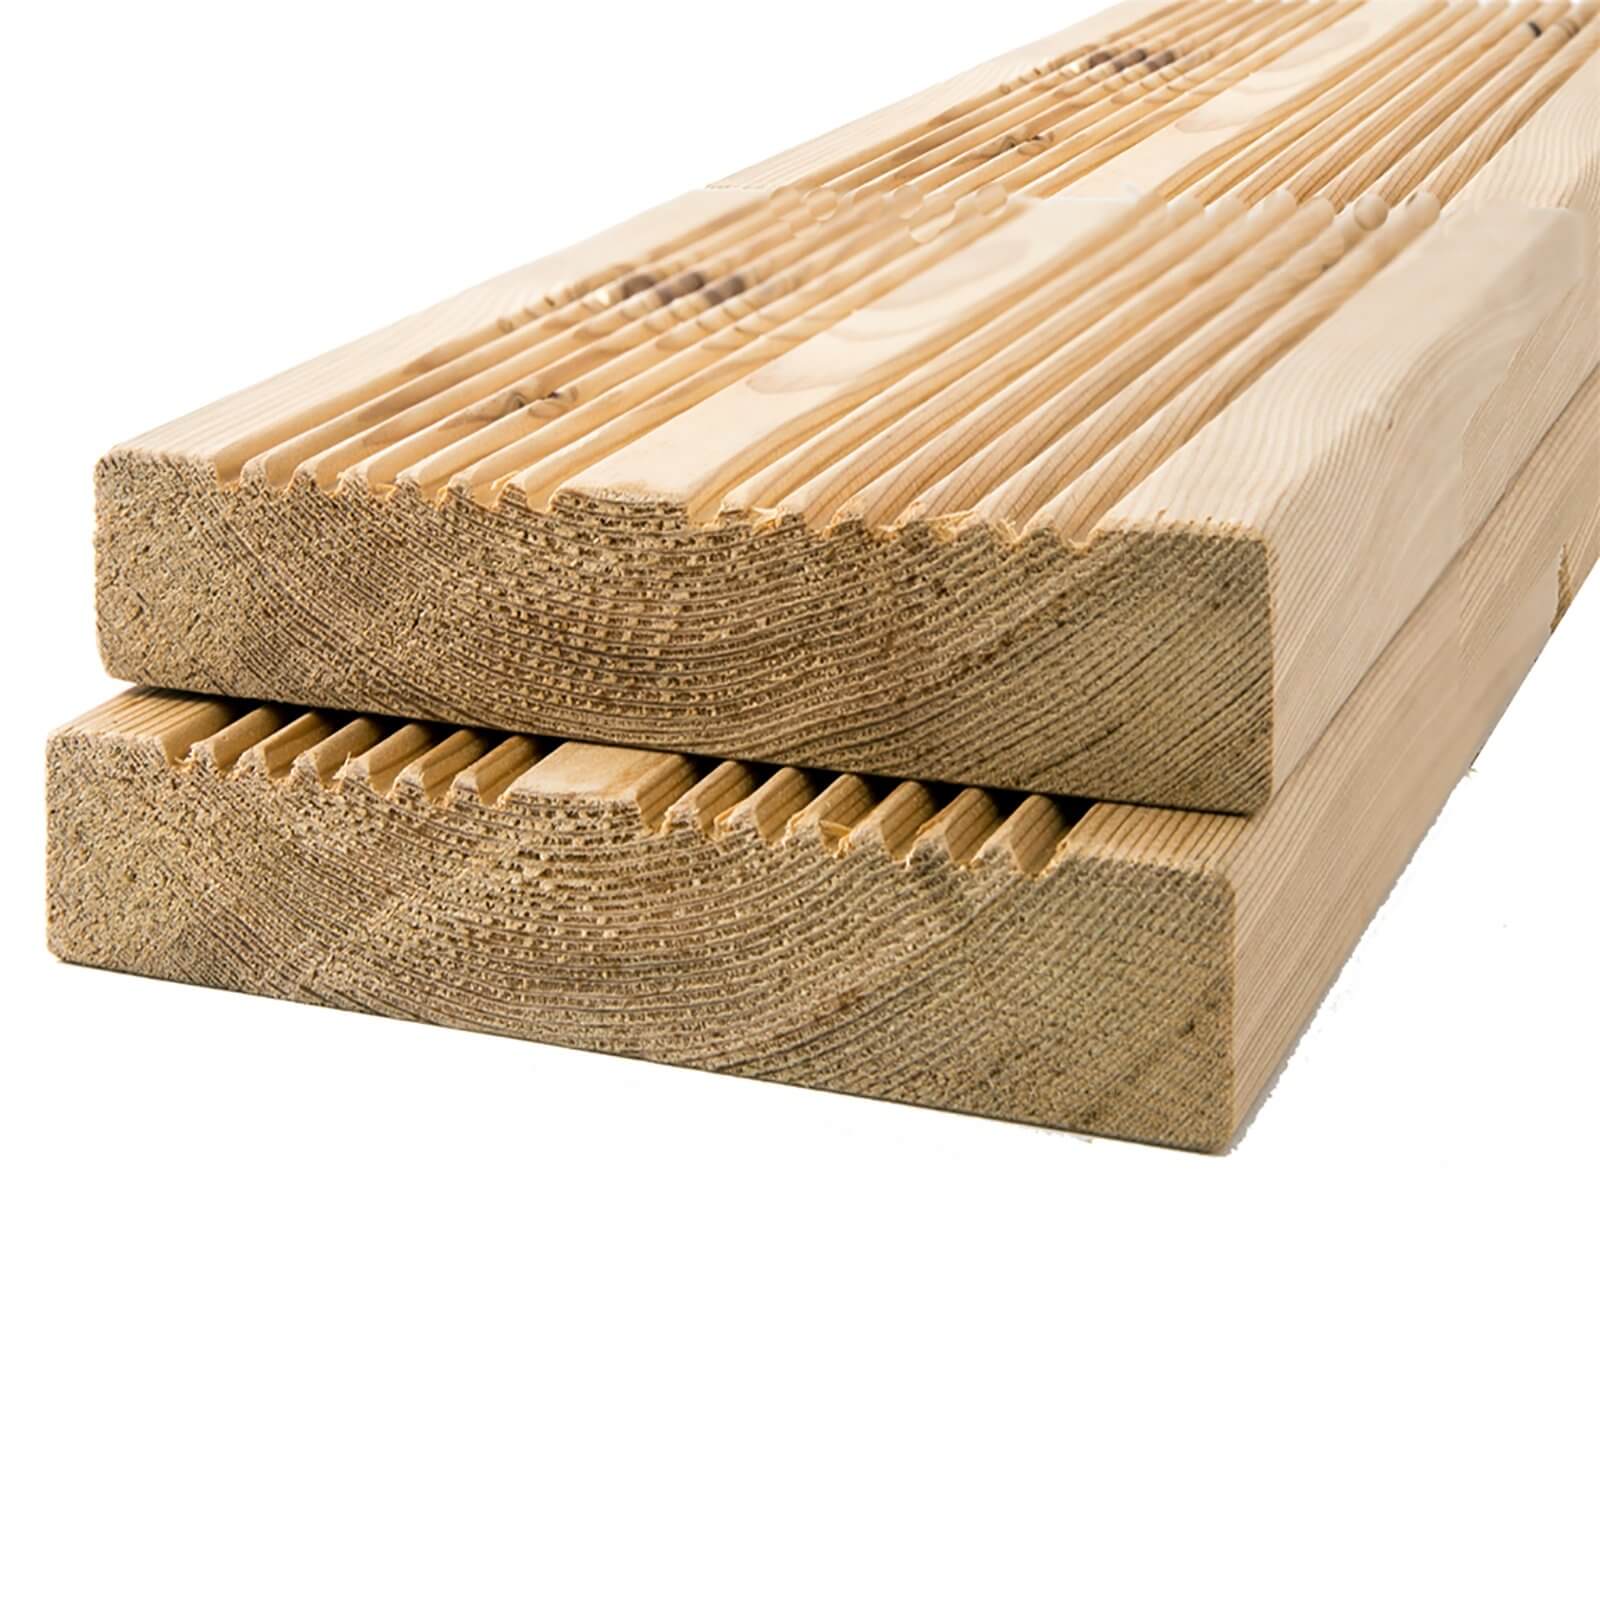 Siberian Larch Decking 27x144mmx4.0mtr (Pack of 4)